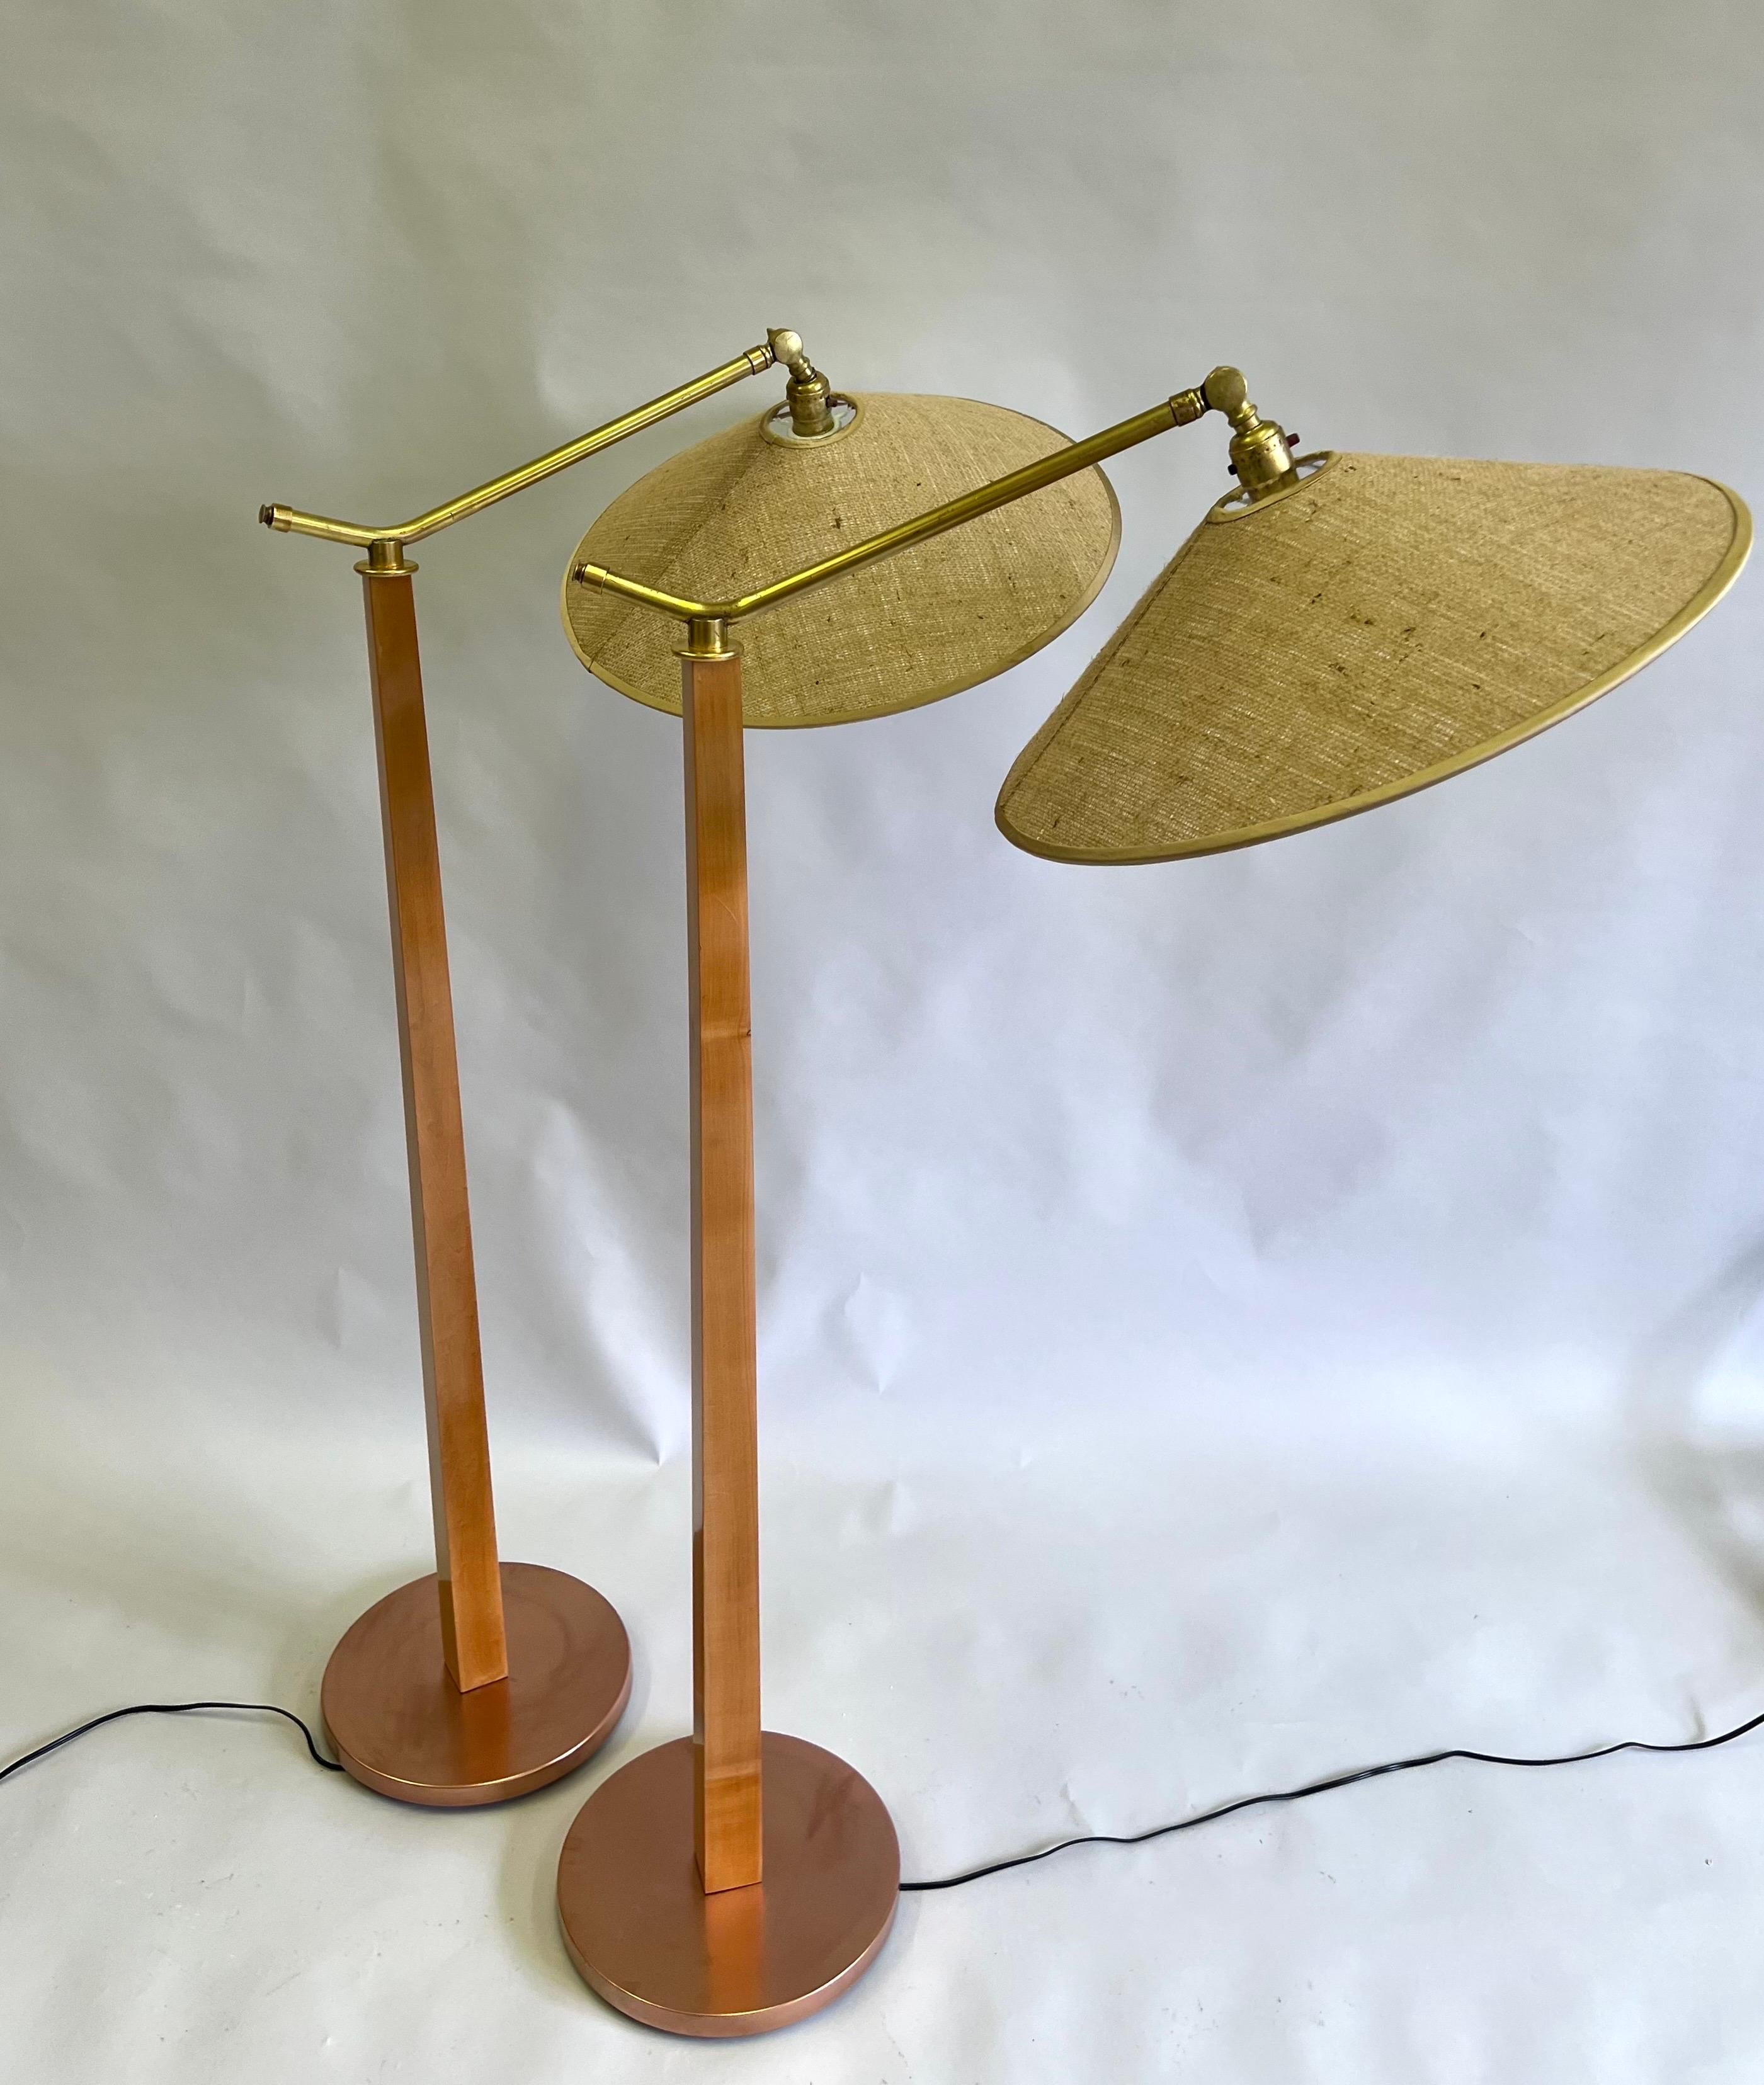 A Rare and Exceptional Pair of Hand Made Studio Craft Floor Lamps Attributed to Pierre Guariche, France circa 1947. Light, airy, minimal, poetic, timeless creations

Additional References: American Studio Craft, Arts and Crafts, Modern Craftsman,